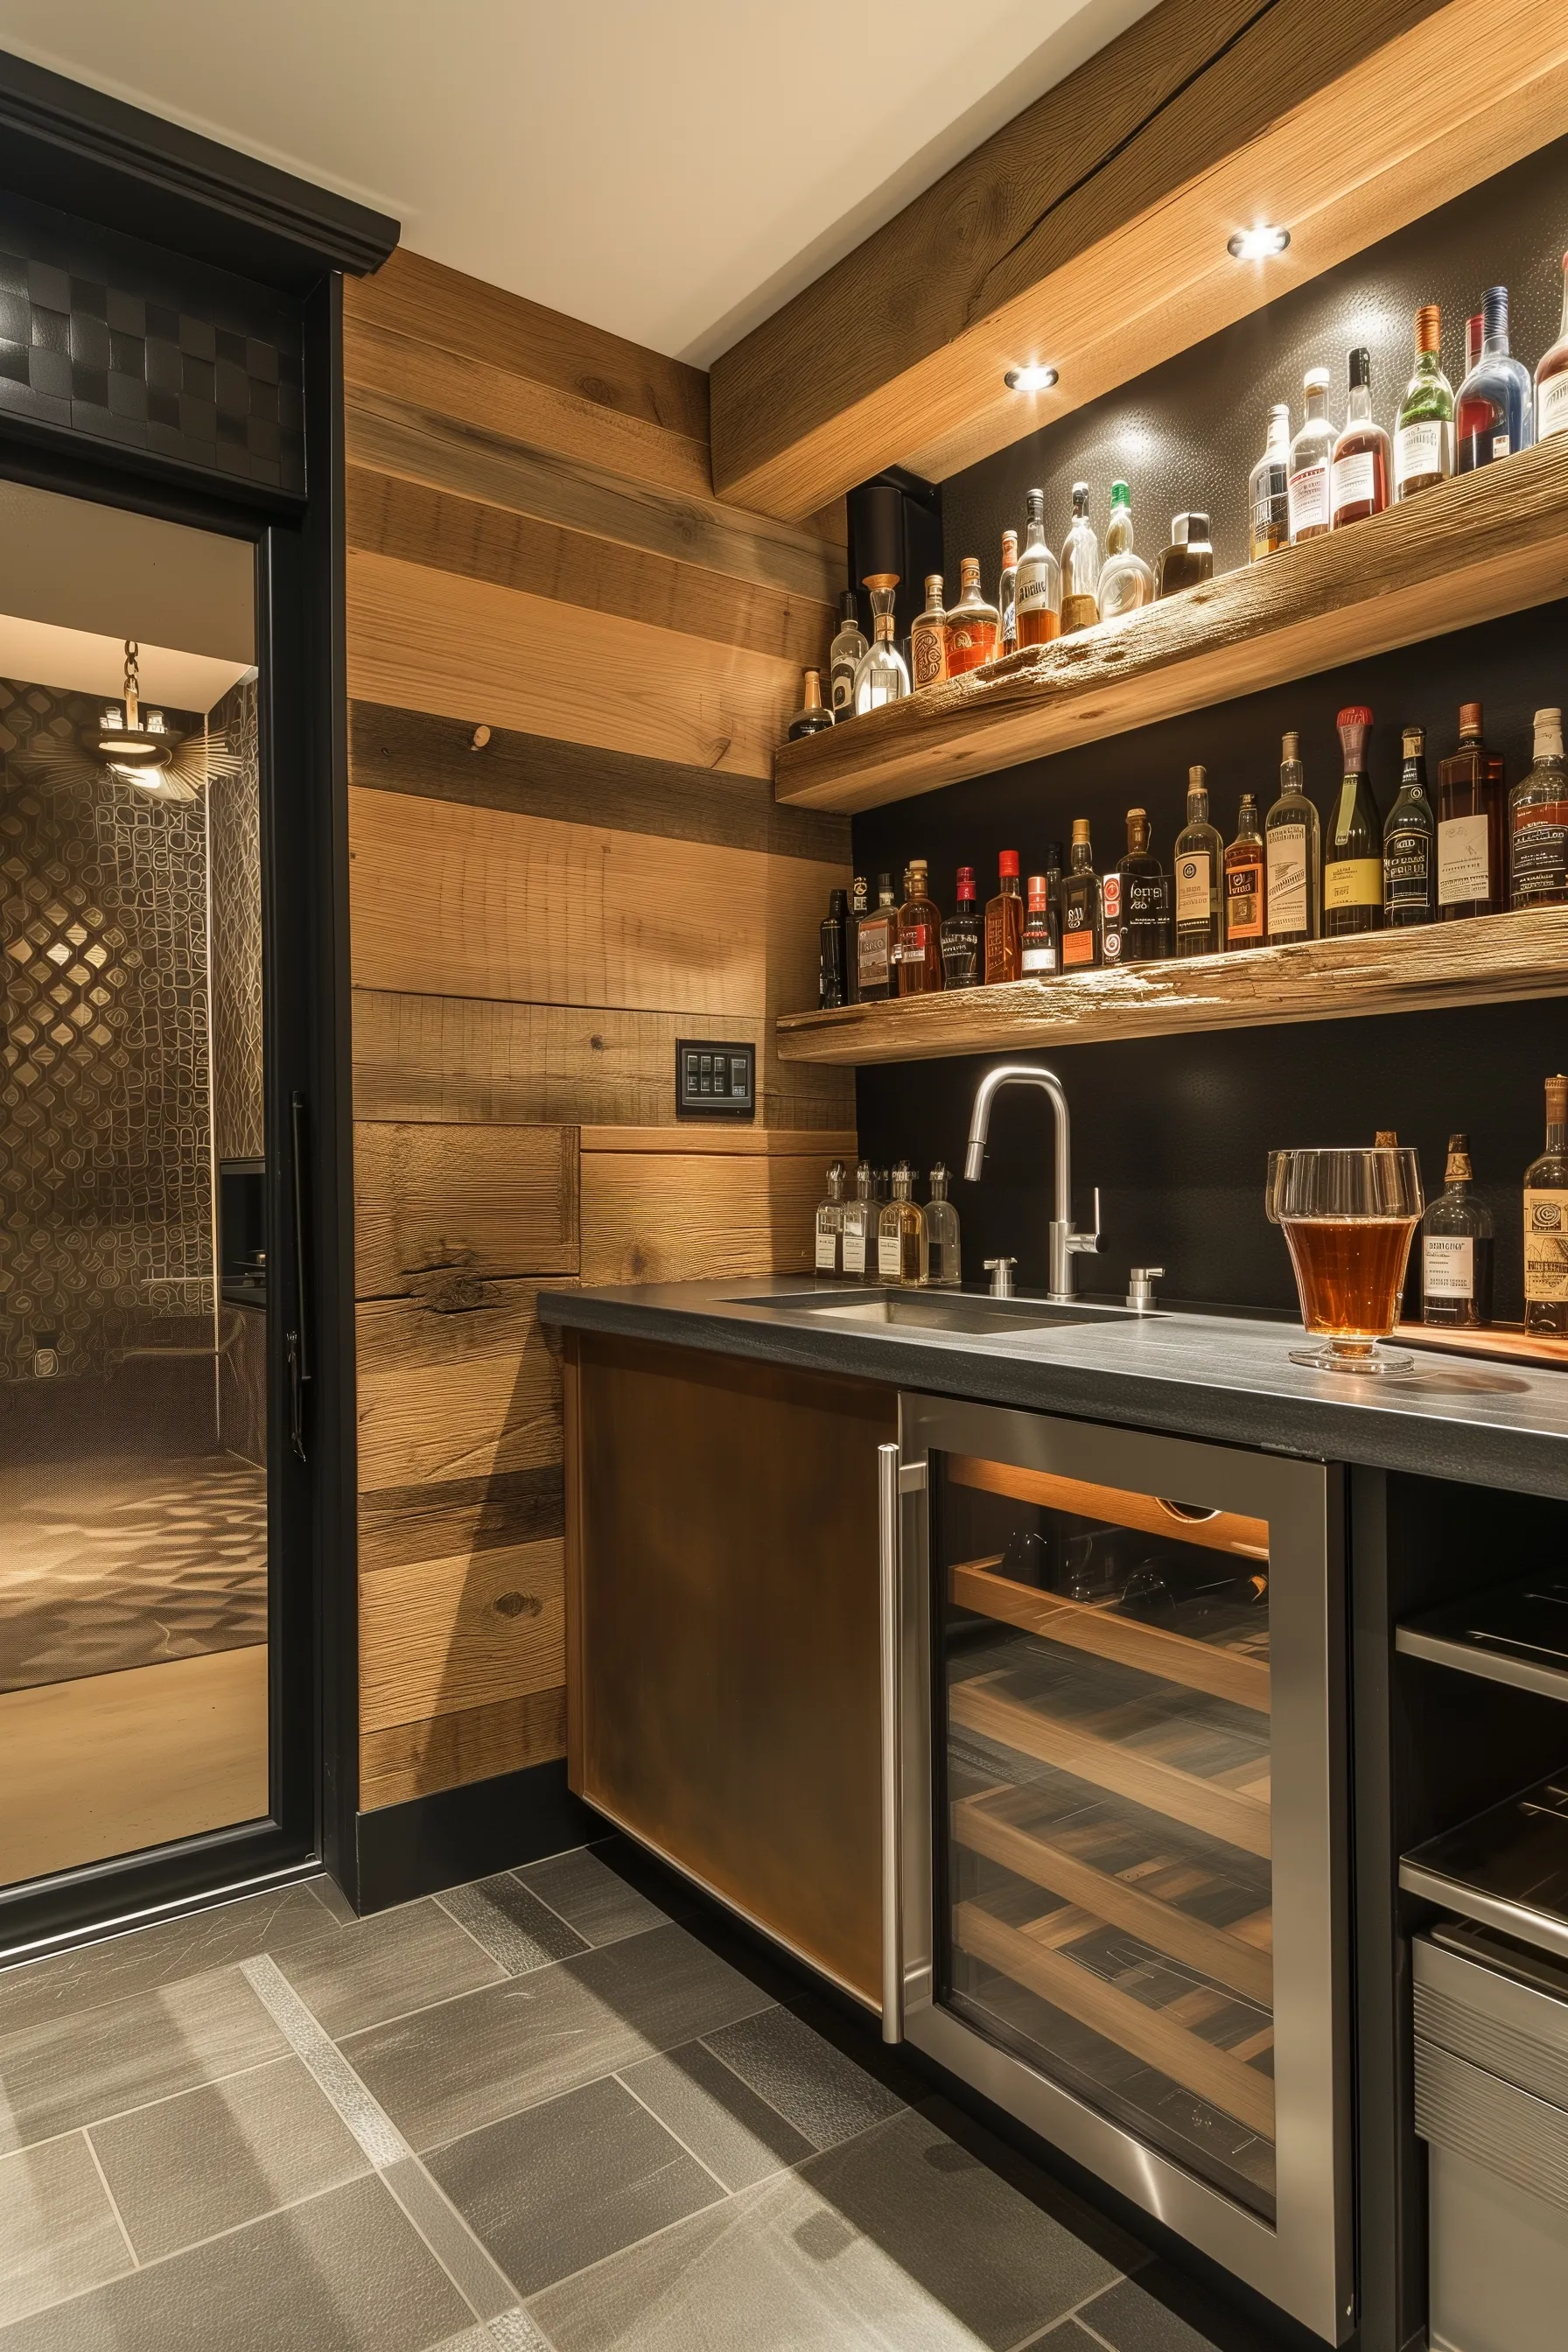 A man cave shed with a wet bar